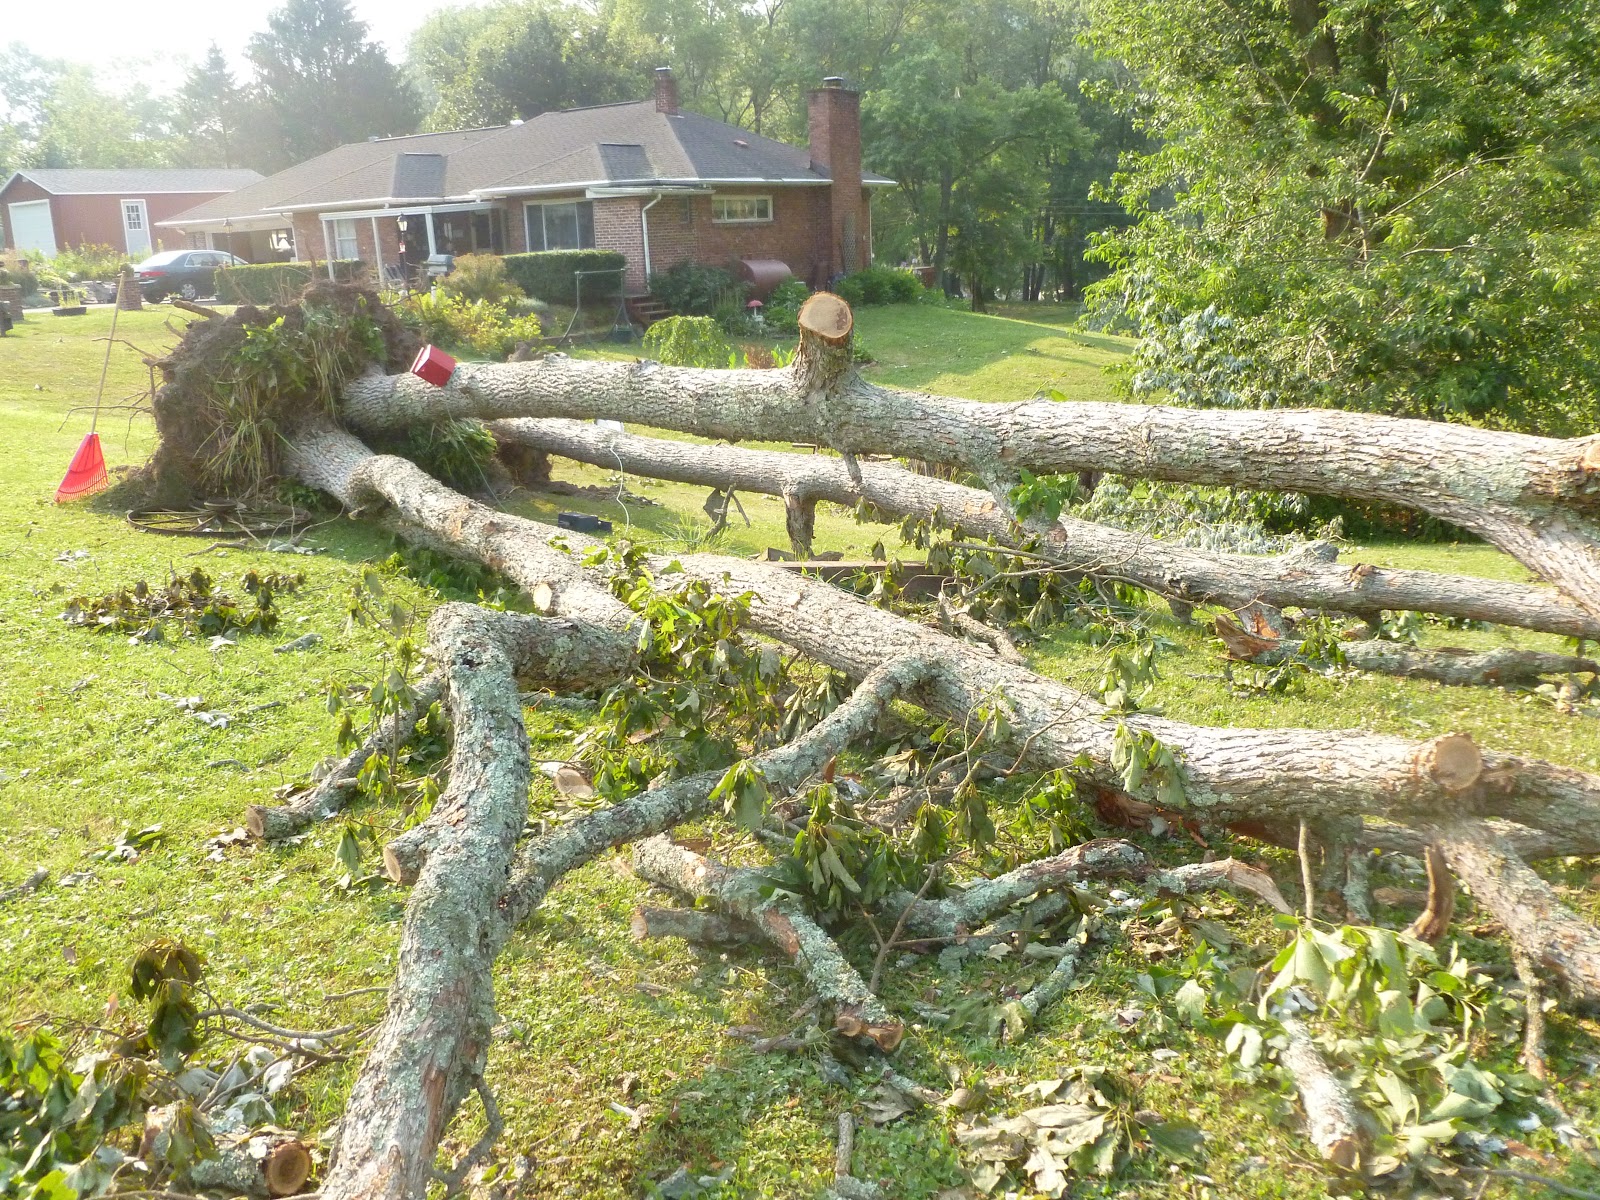 , Violent Storm Knocks Out Power for Eleven Days, Growing in Grace